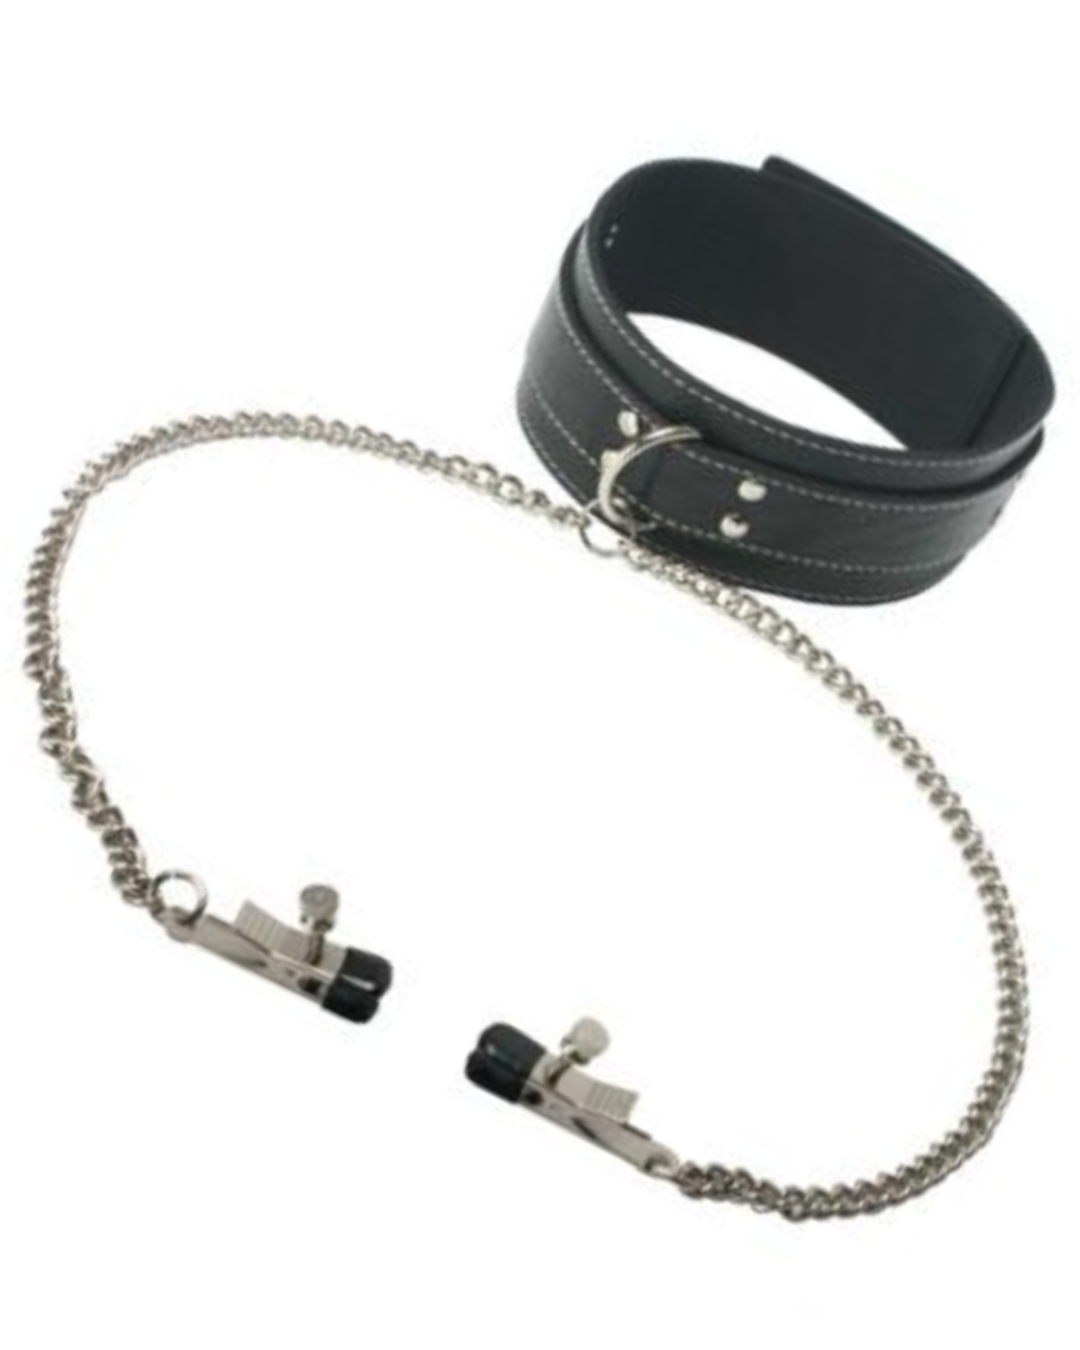 Coveted Leather Collar and Nipple Clamp Set